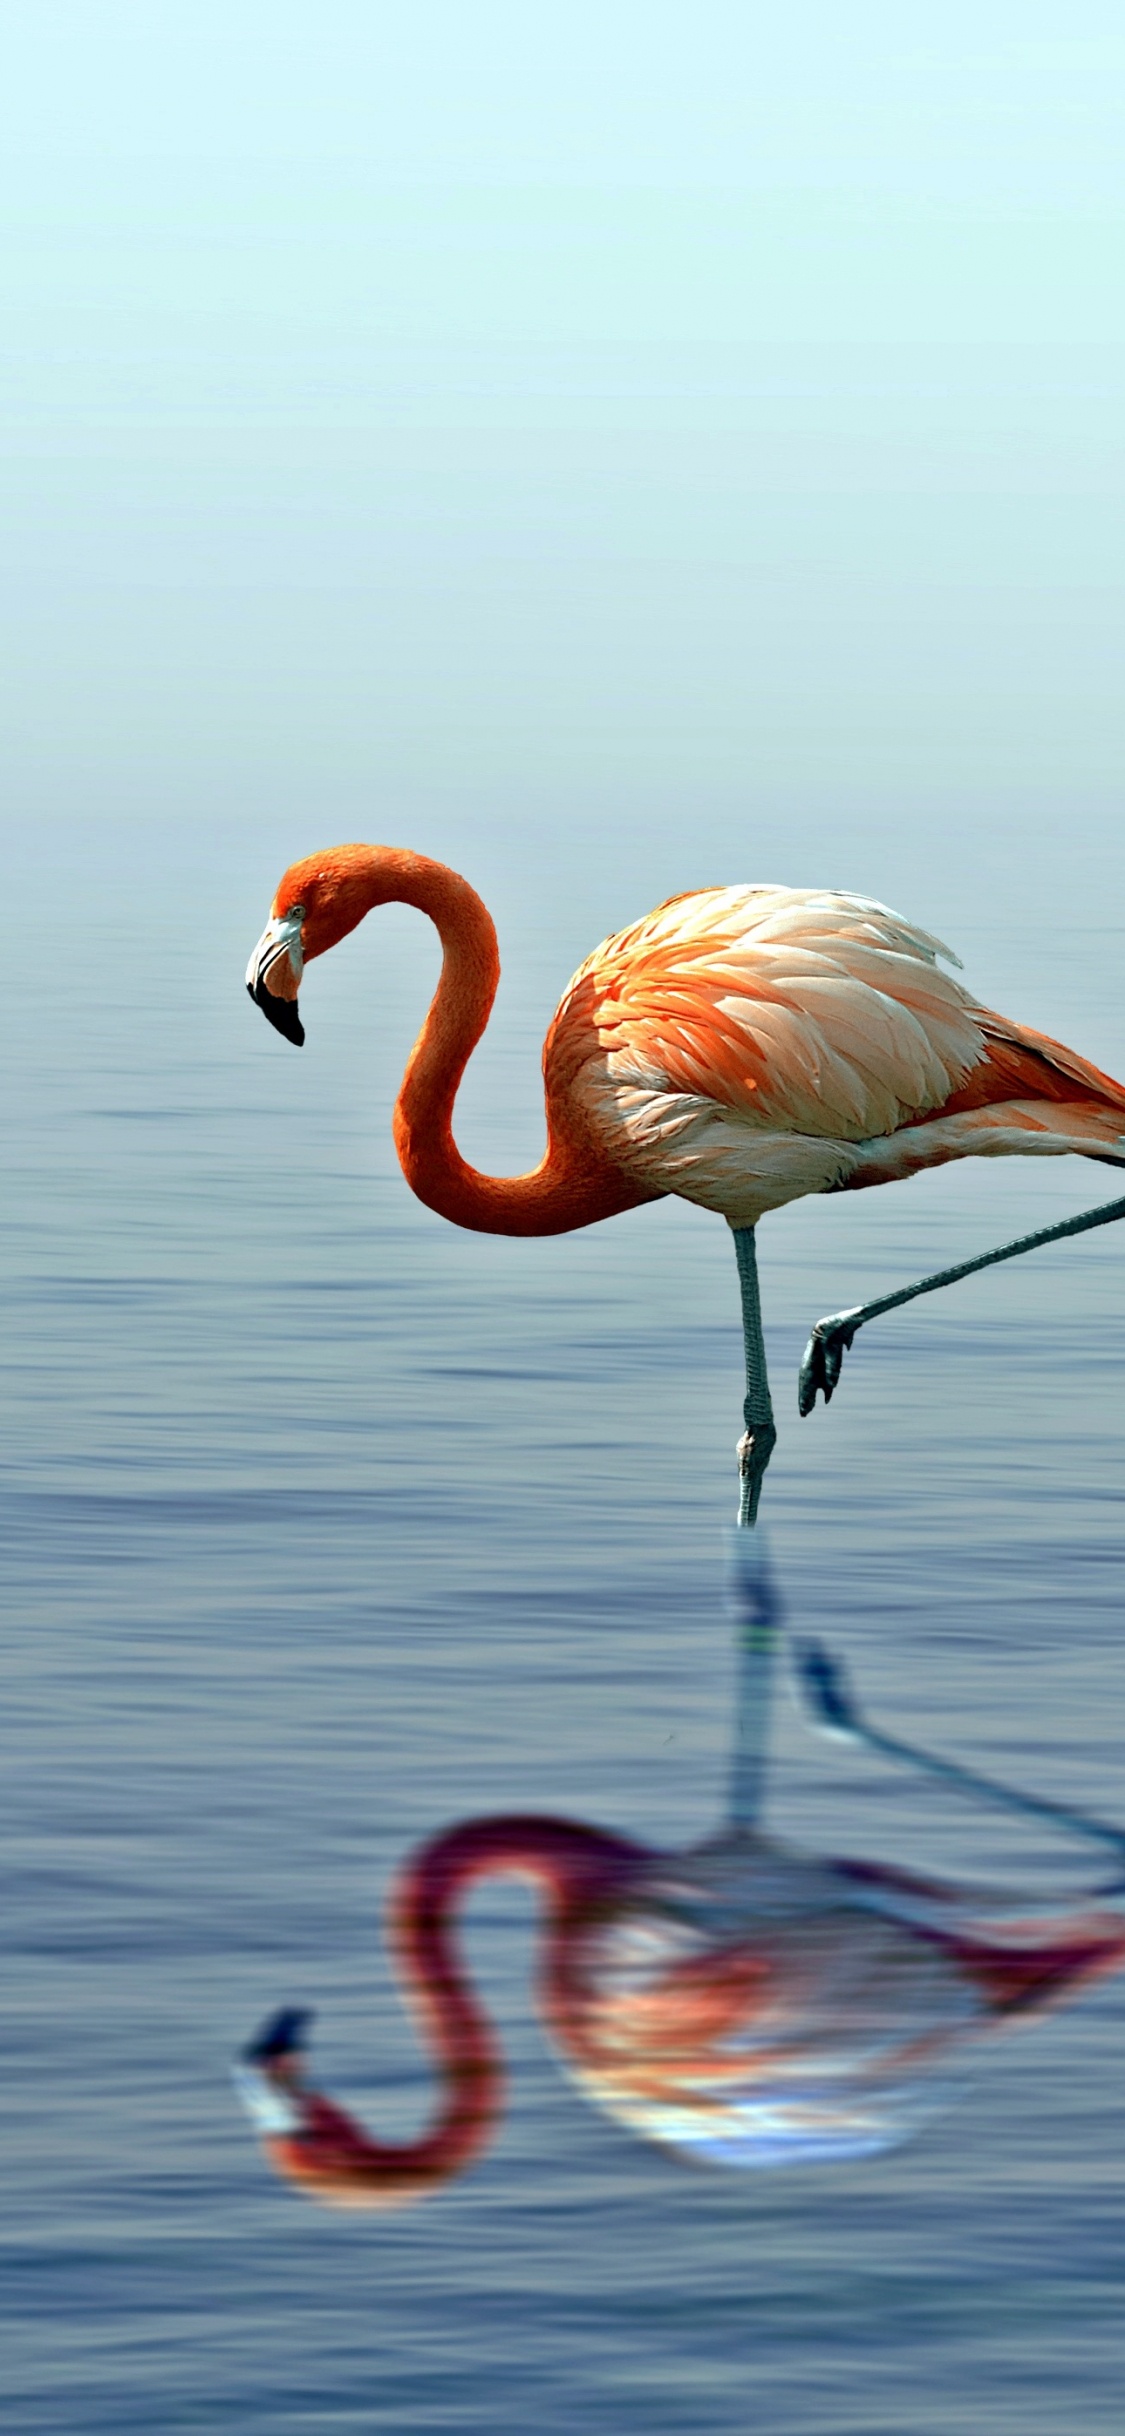 Pink Flamingo on Water During Daytime. Wallpaper in 1125x2436 Resolution